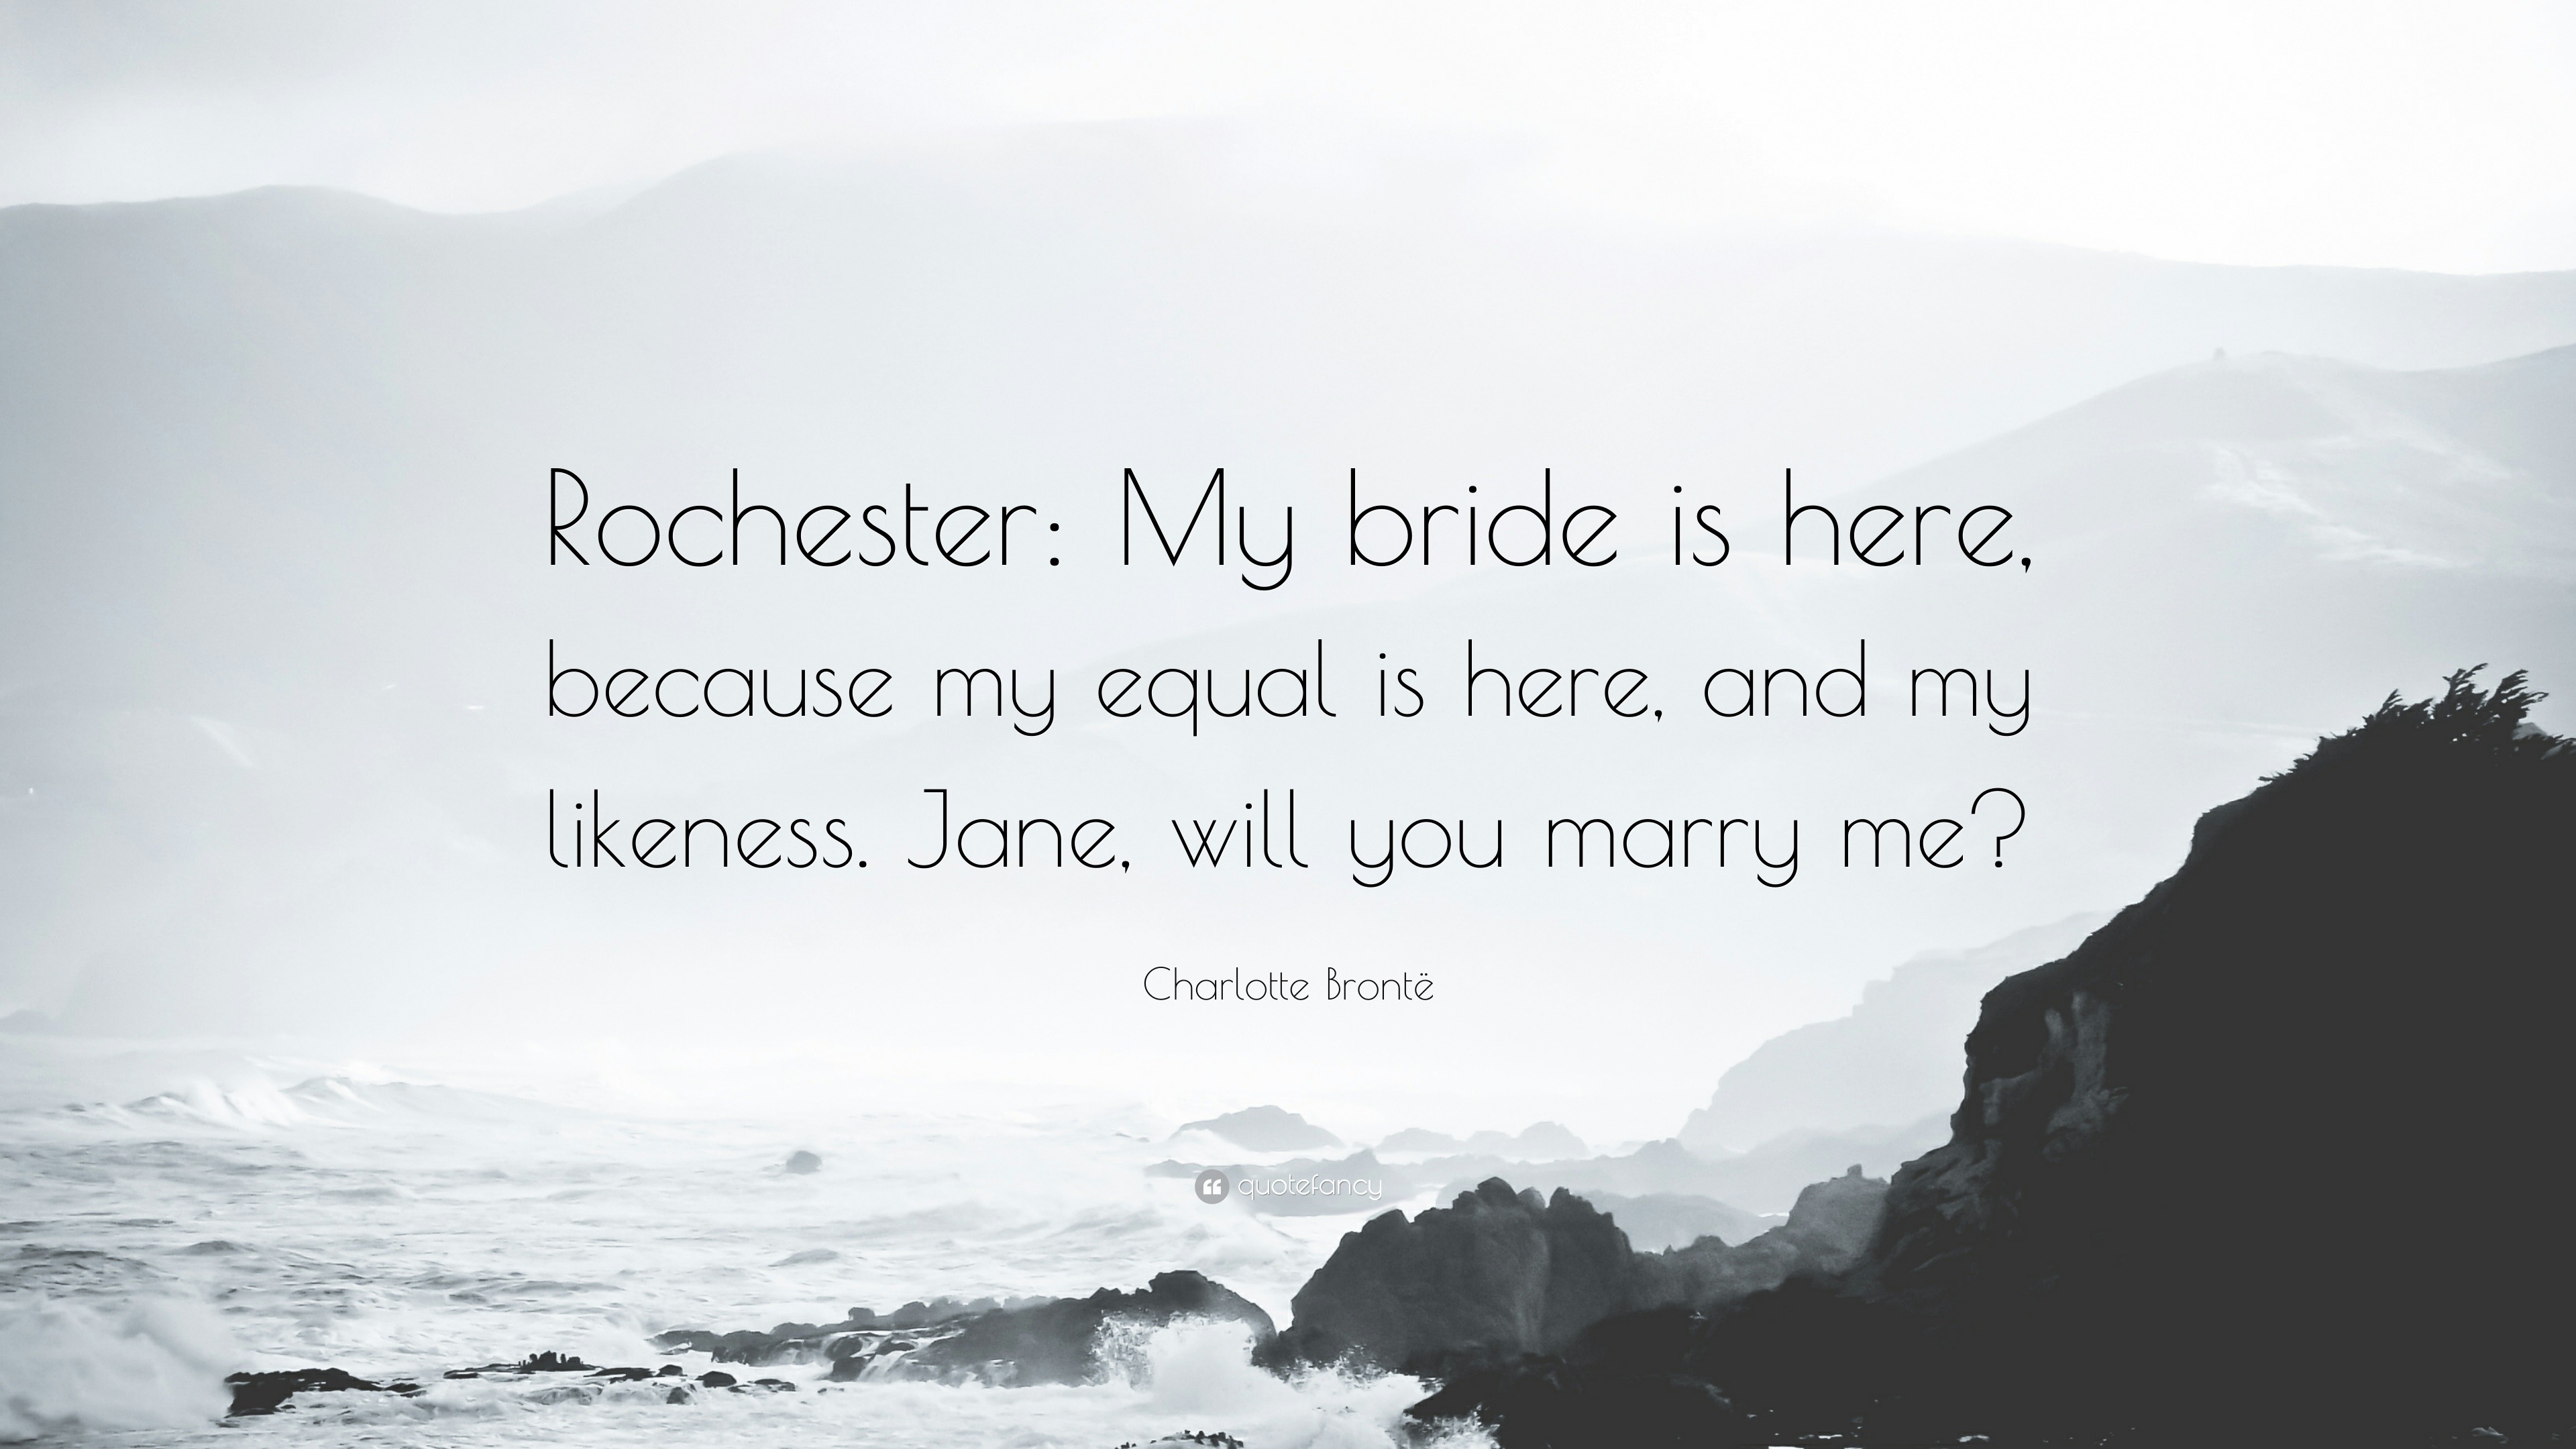 Charlotte Brontë Quote: “Rochester: My bride here, because my equal is here, and my